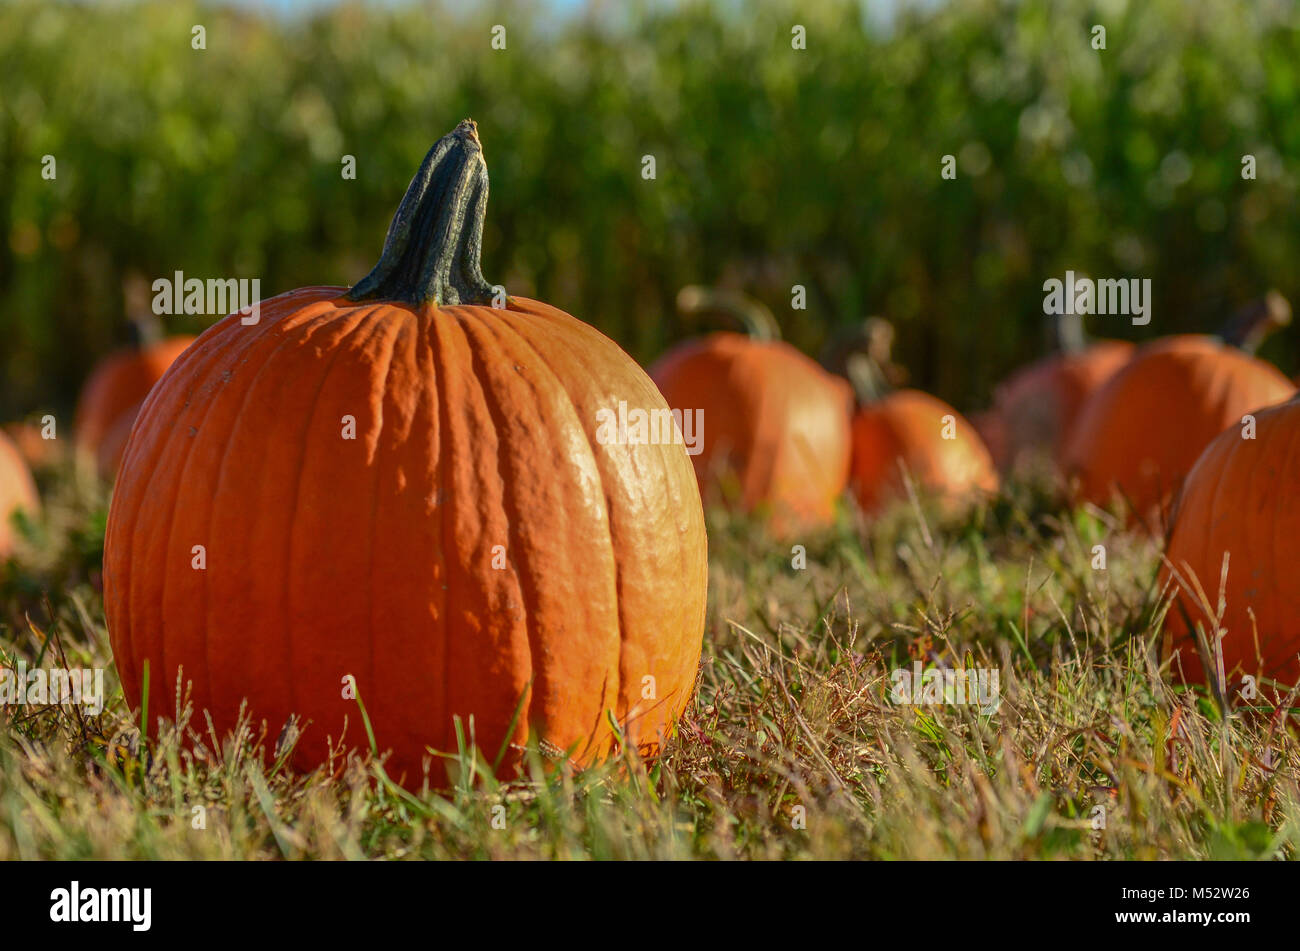 One large pumpkin in front of others in pumpkin patch. Stock Photo